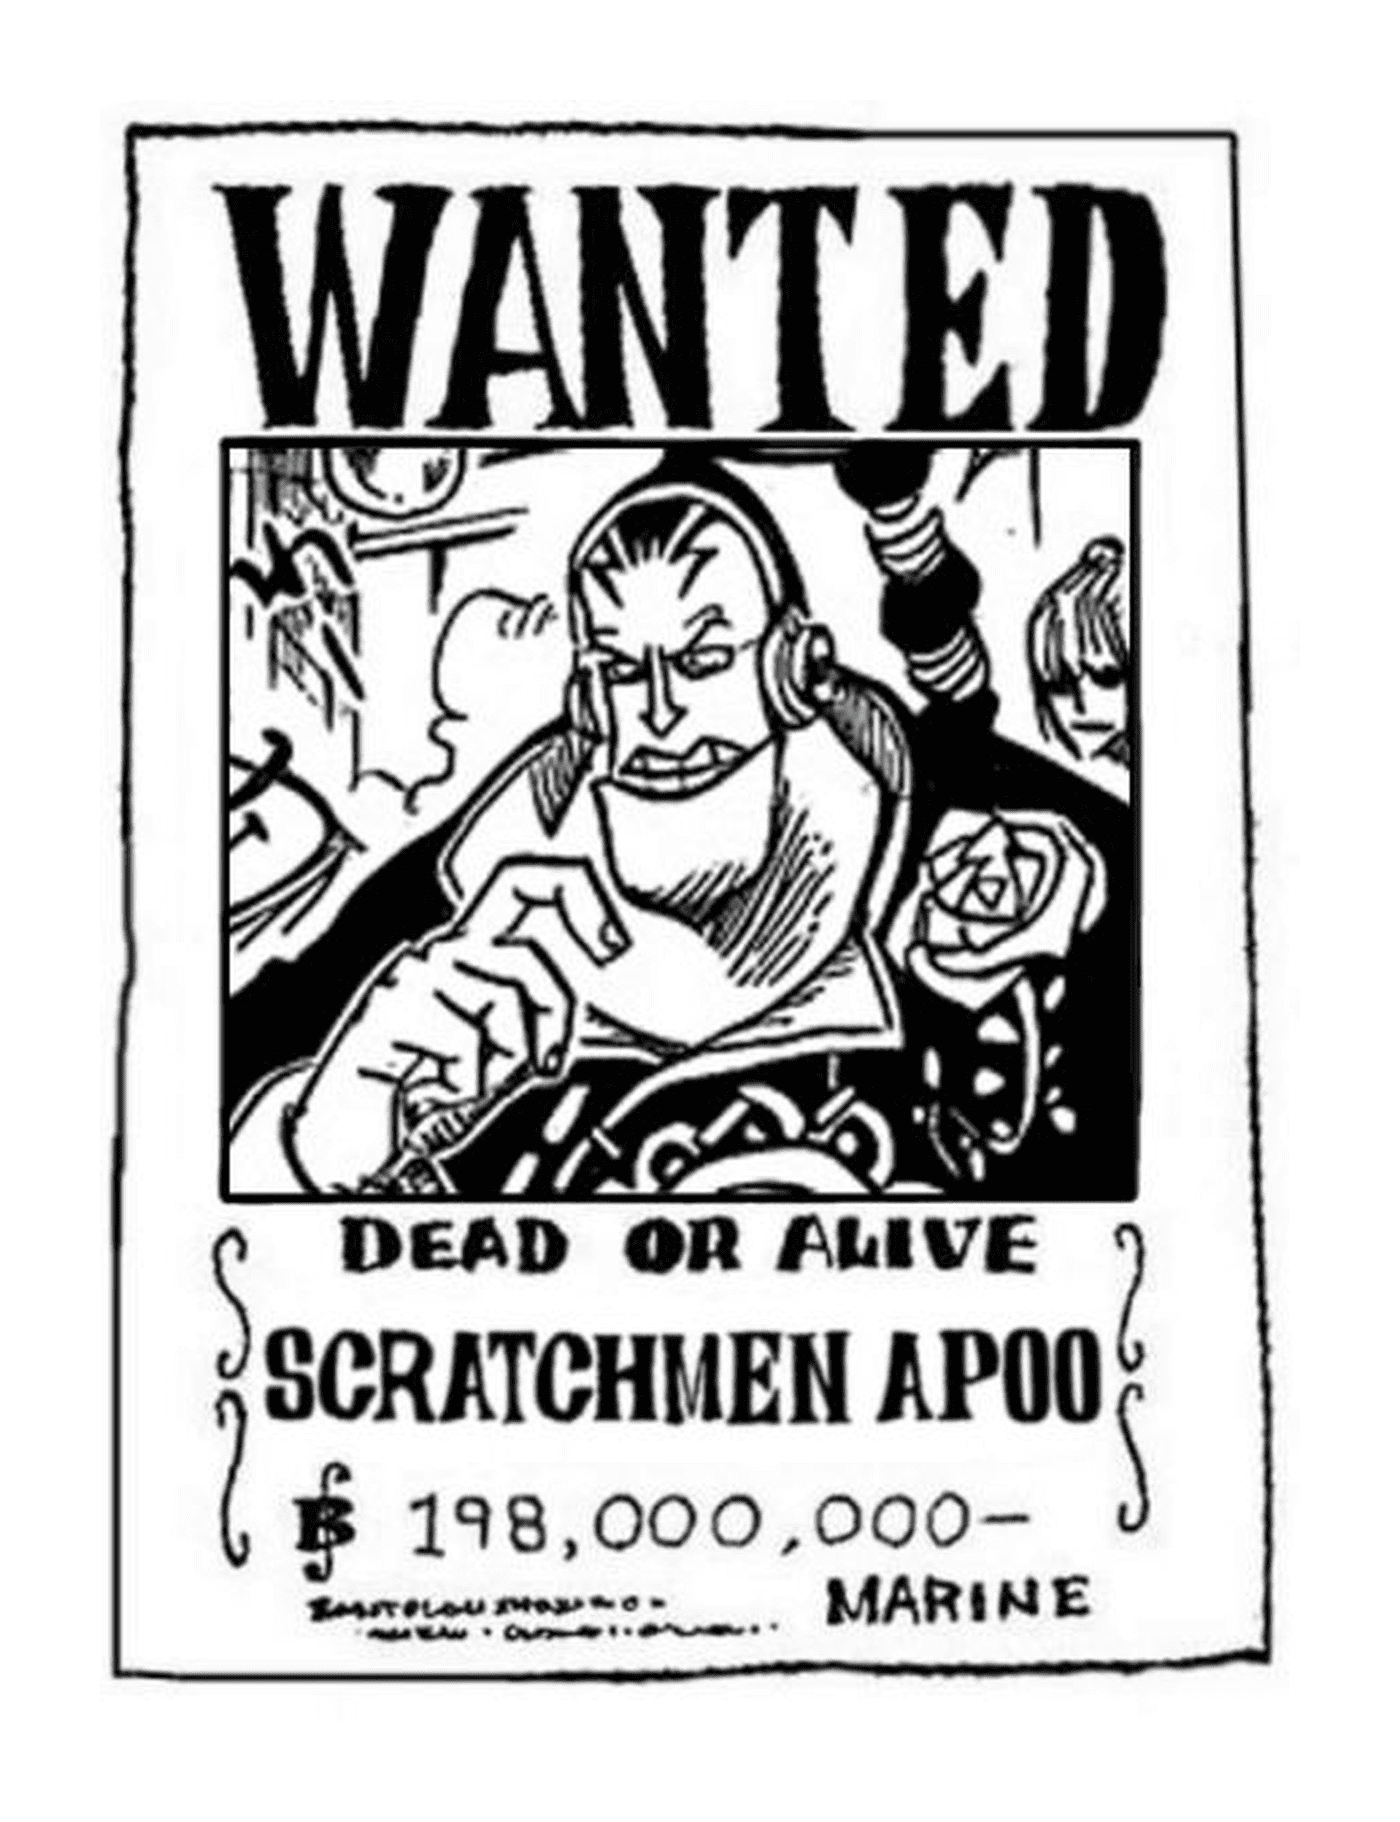  Wanted Scratchmen Apoo, dead or alive 